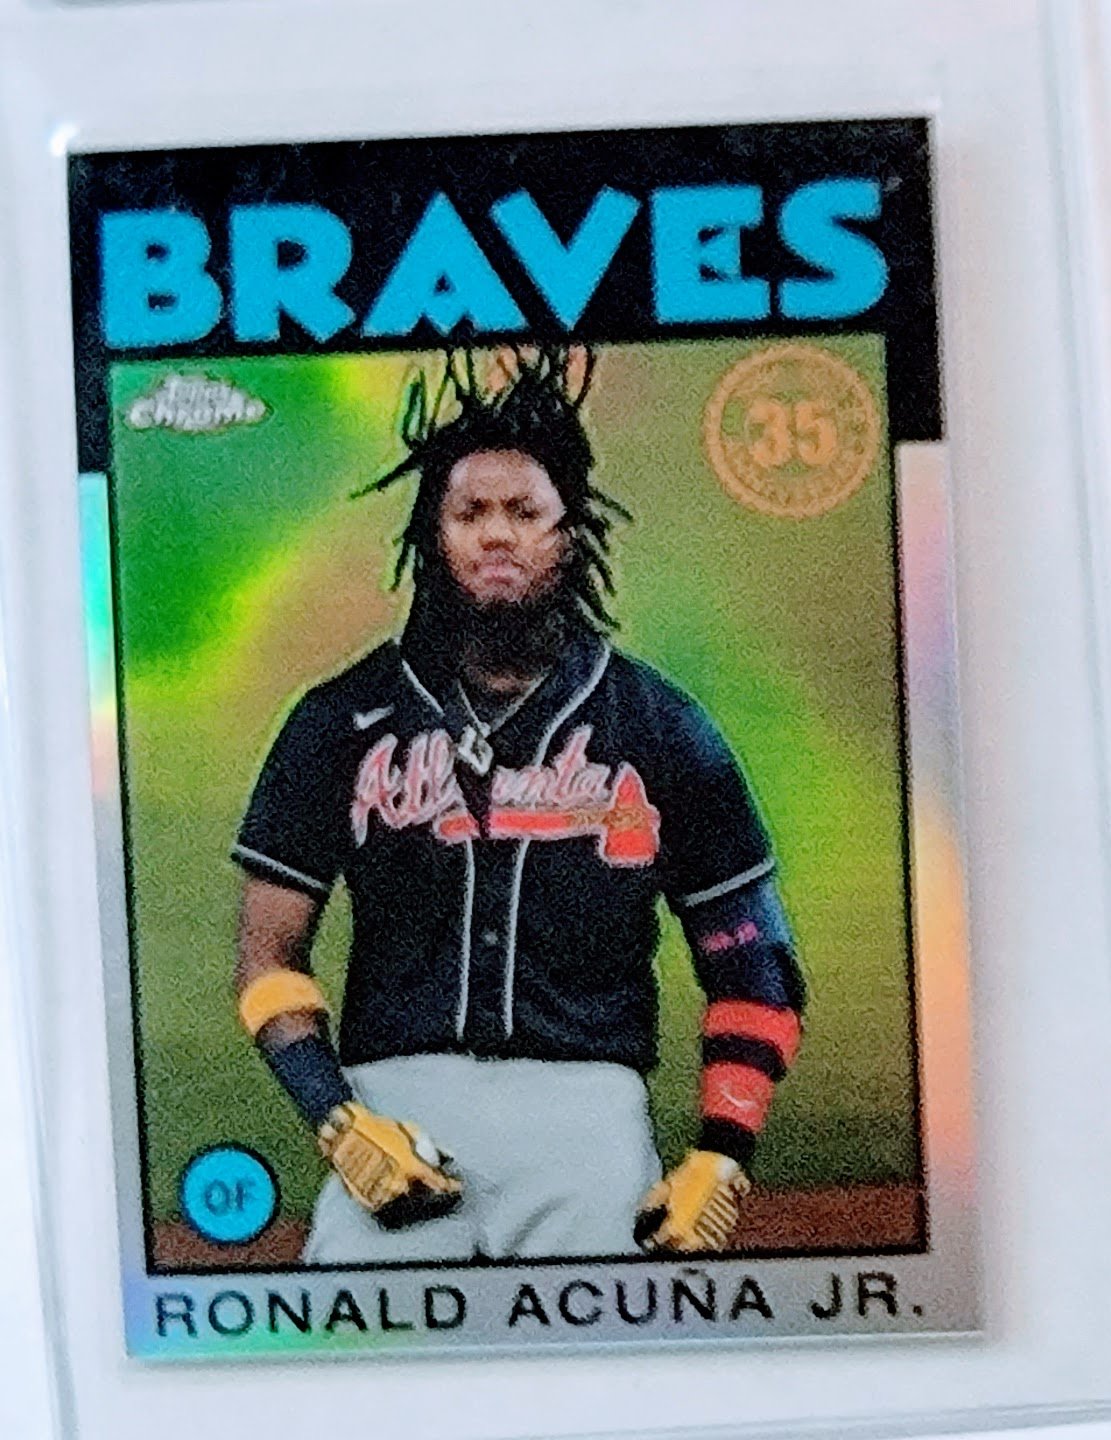 2021 Topps Chrome Ronald Acuna Jr 1986 35th Anniversary Refractor Baseball Trading Card TPTV simple Xclusive Collectibles   